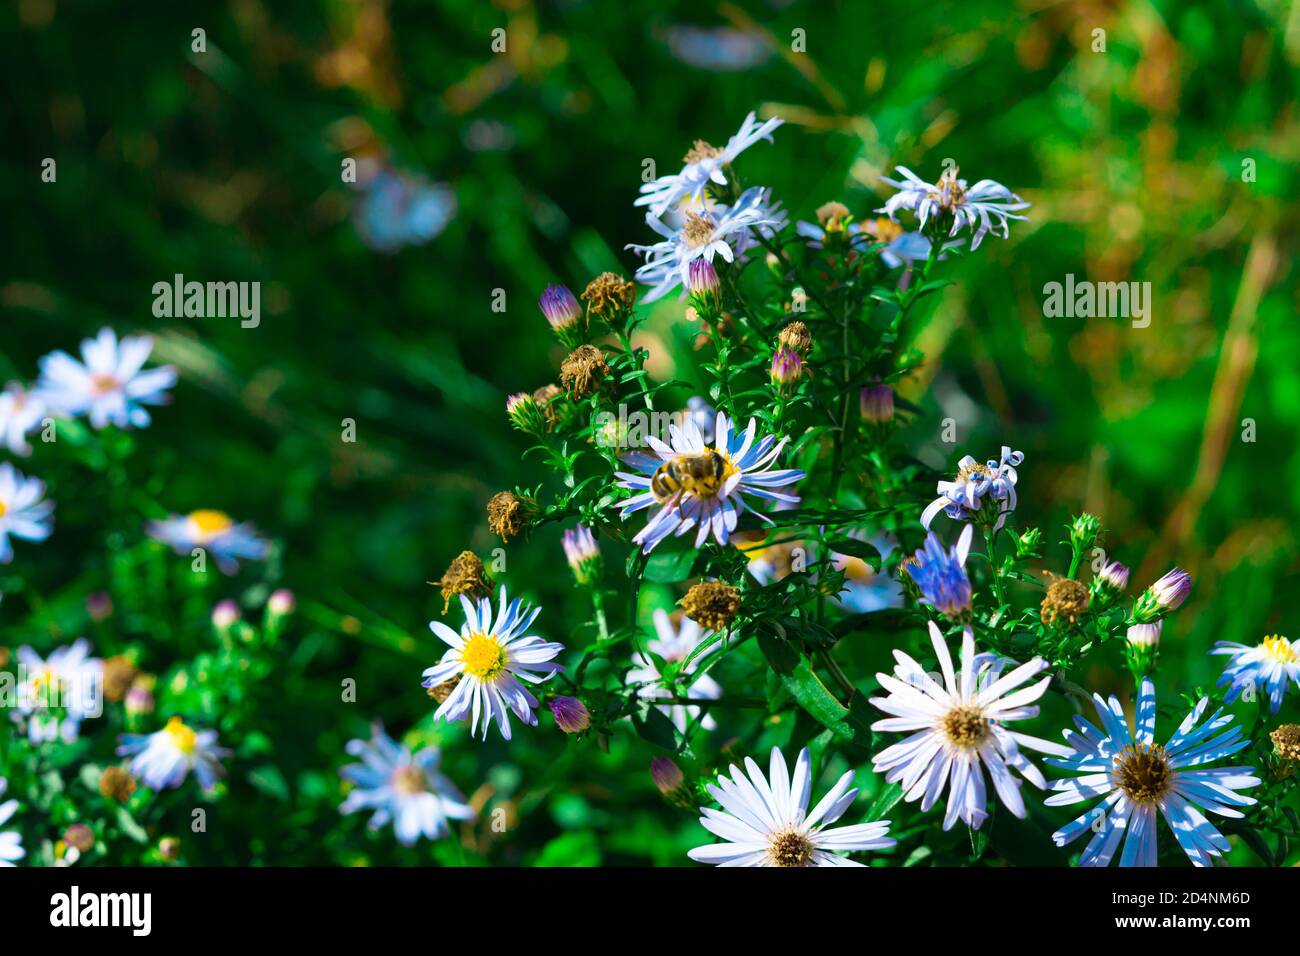 bees are pollinating some flowers Stock Photo